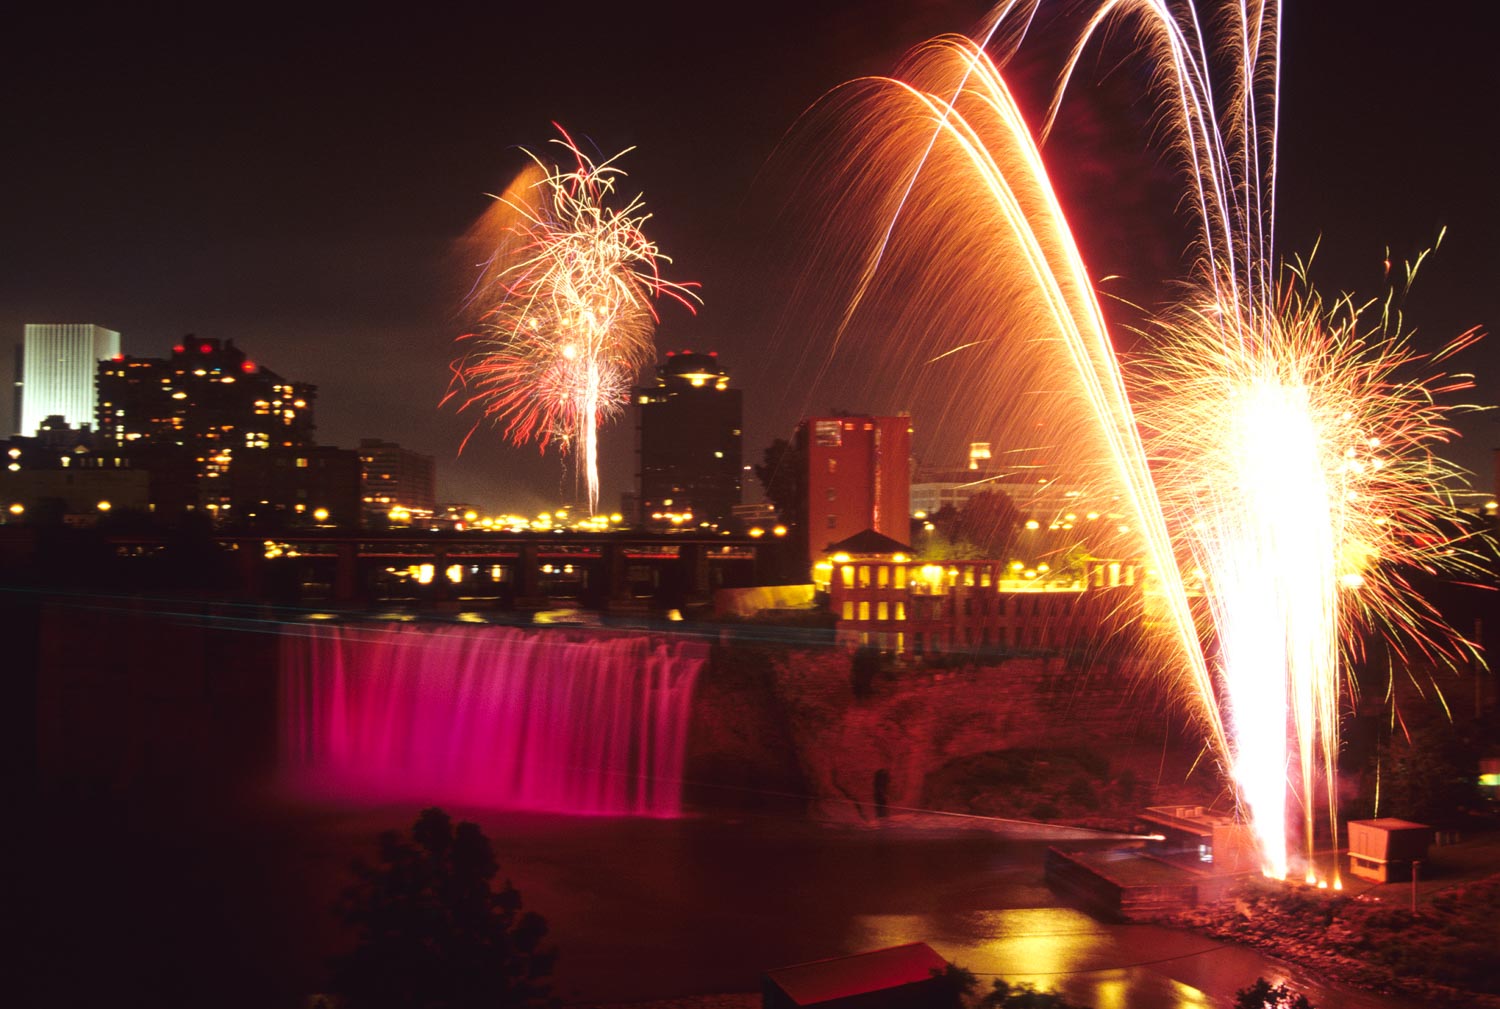 High Falls with fireworks at night in Rochester, NY